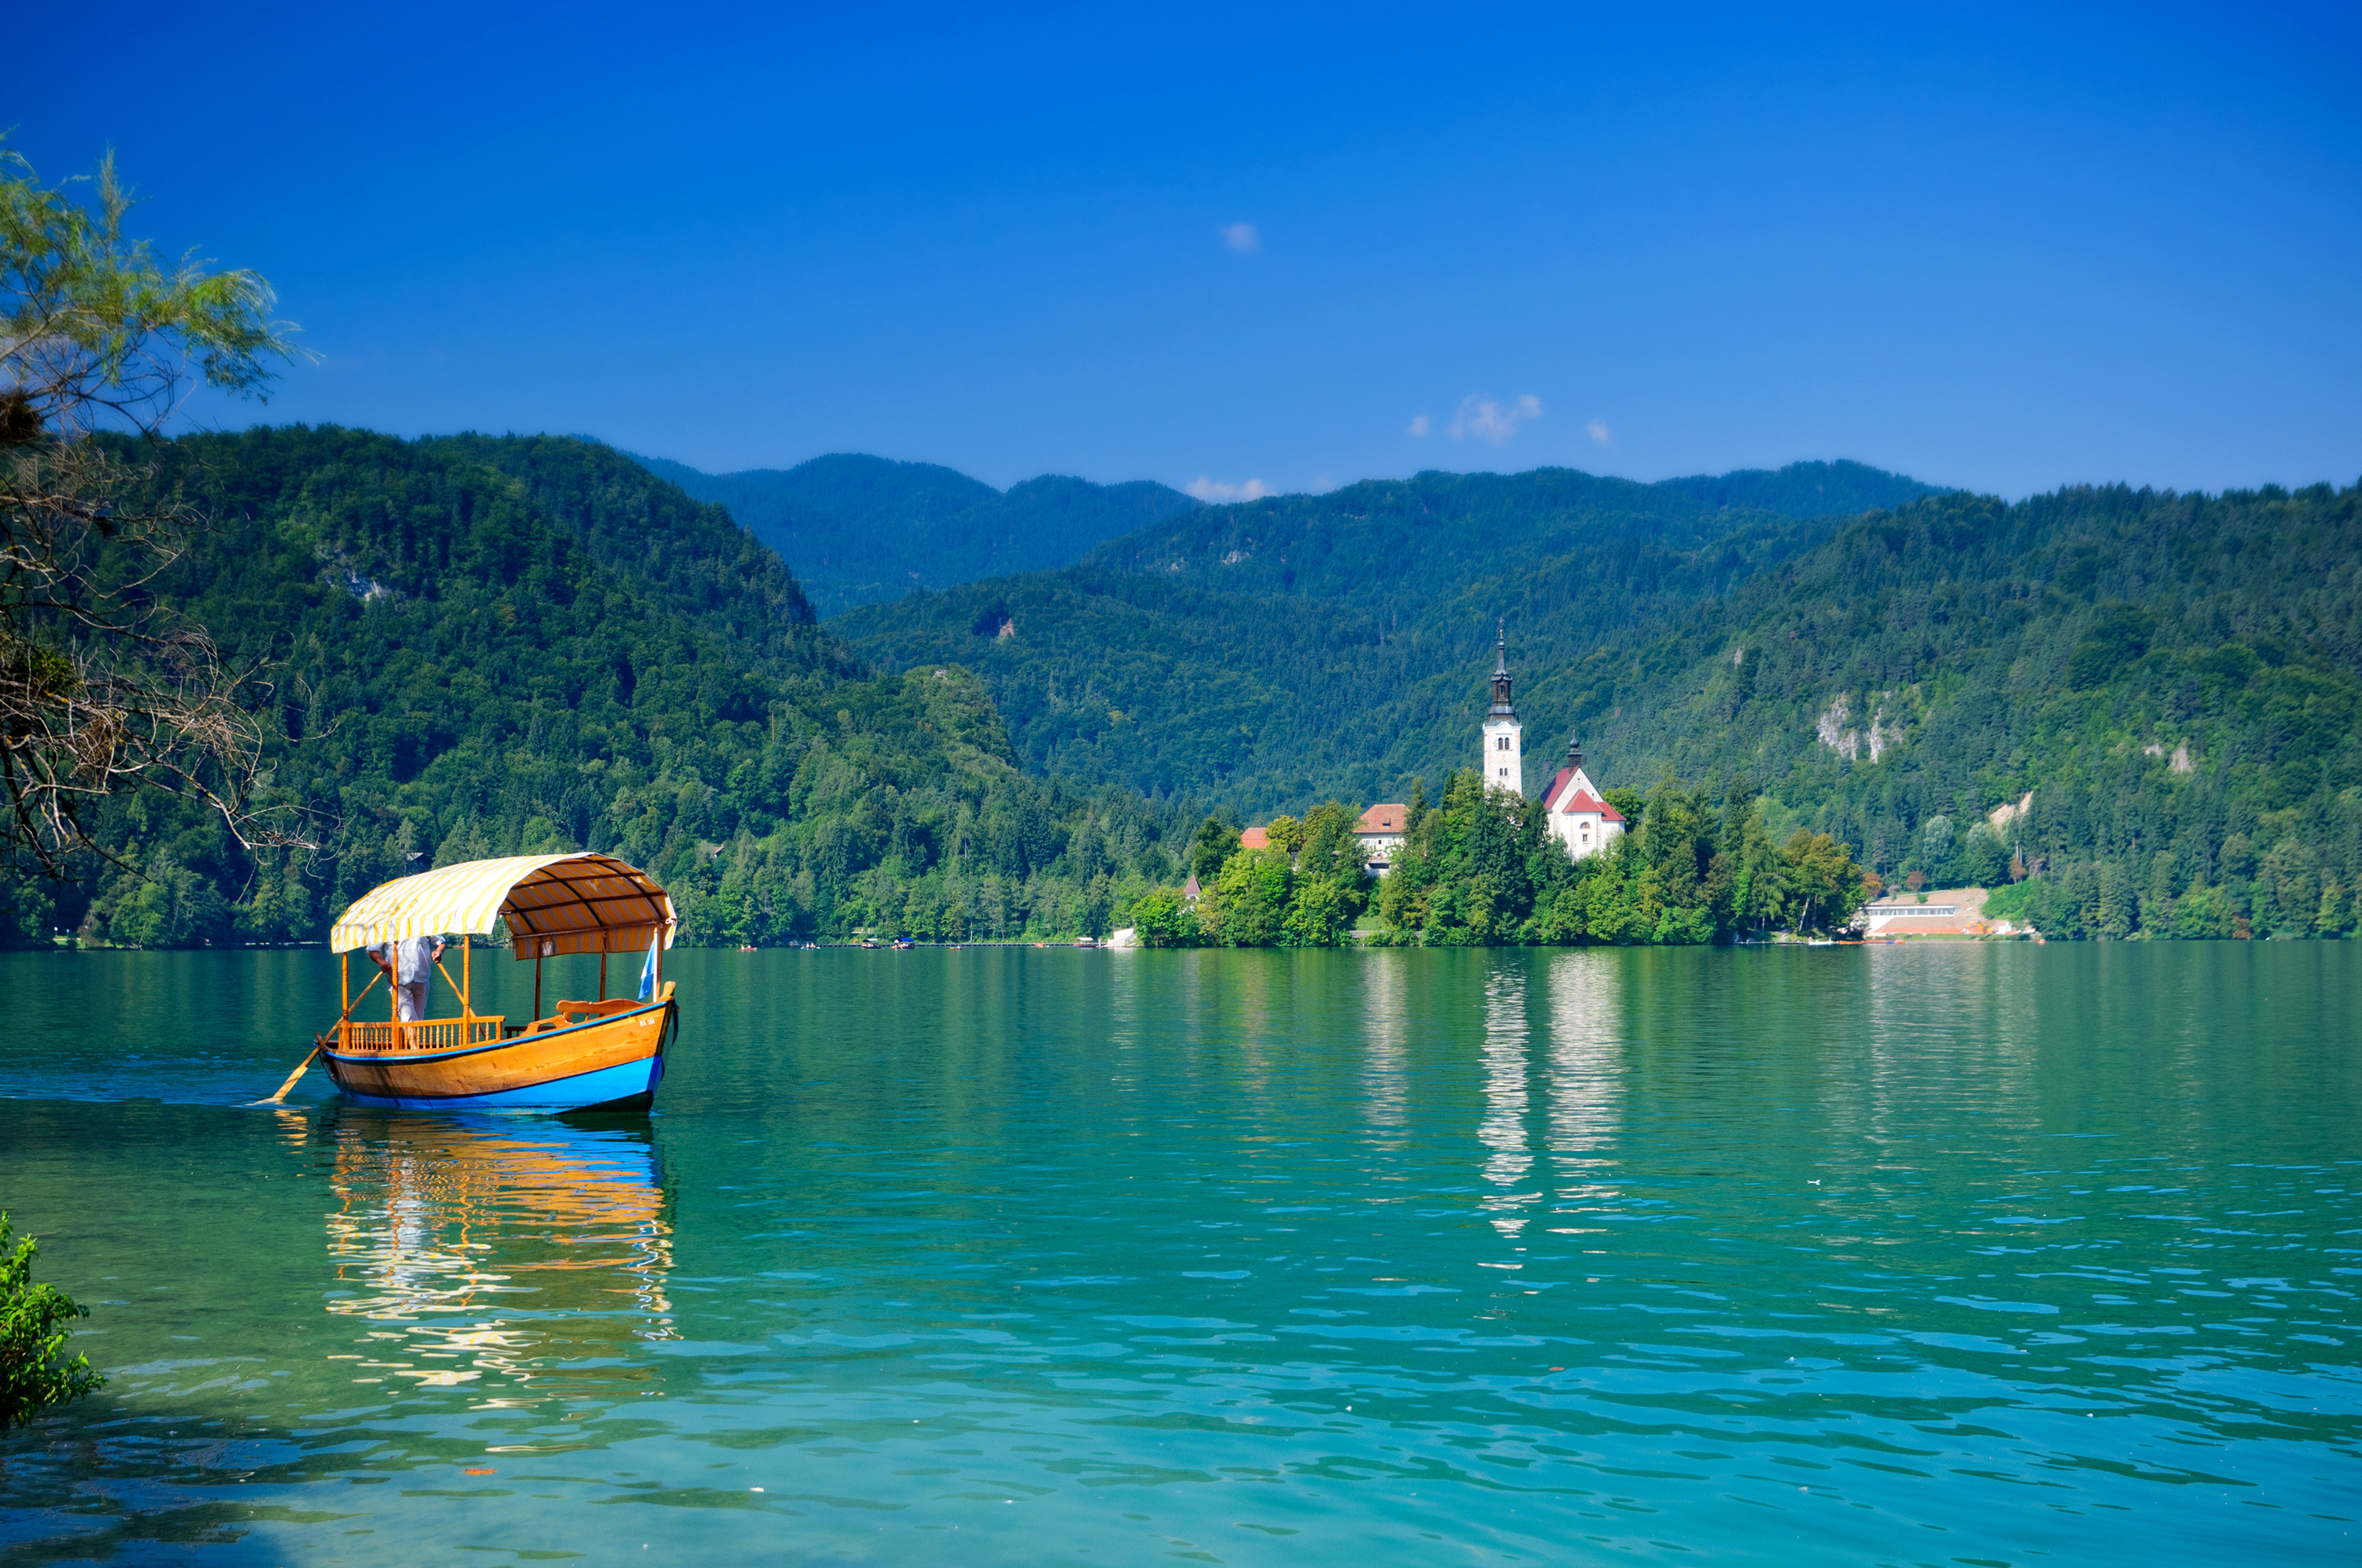 Slovenia Green Award for the Destination (Municipality) of Bled